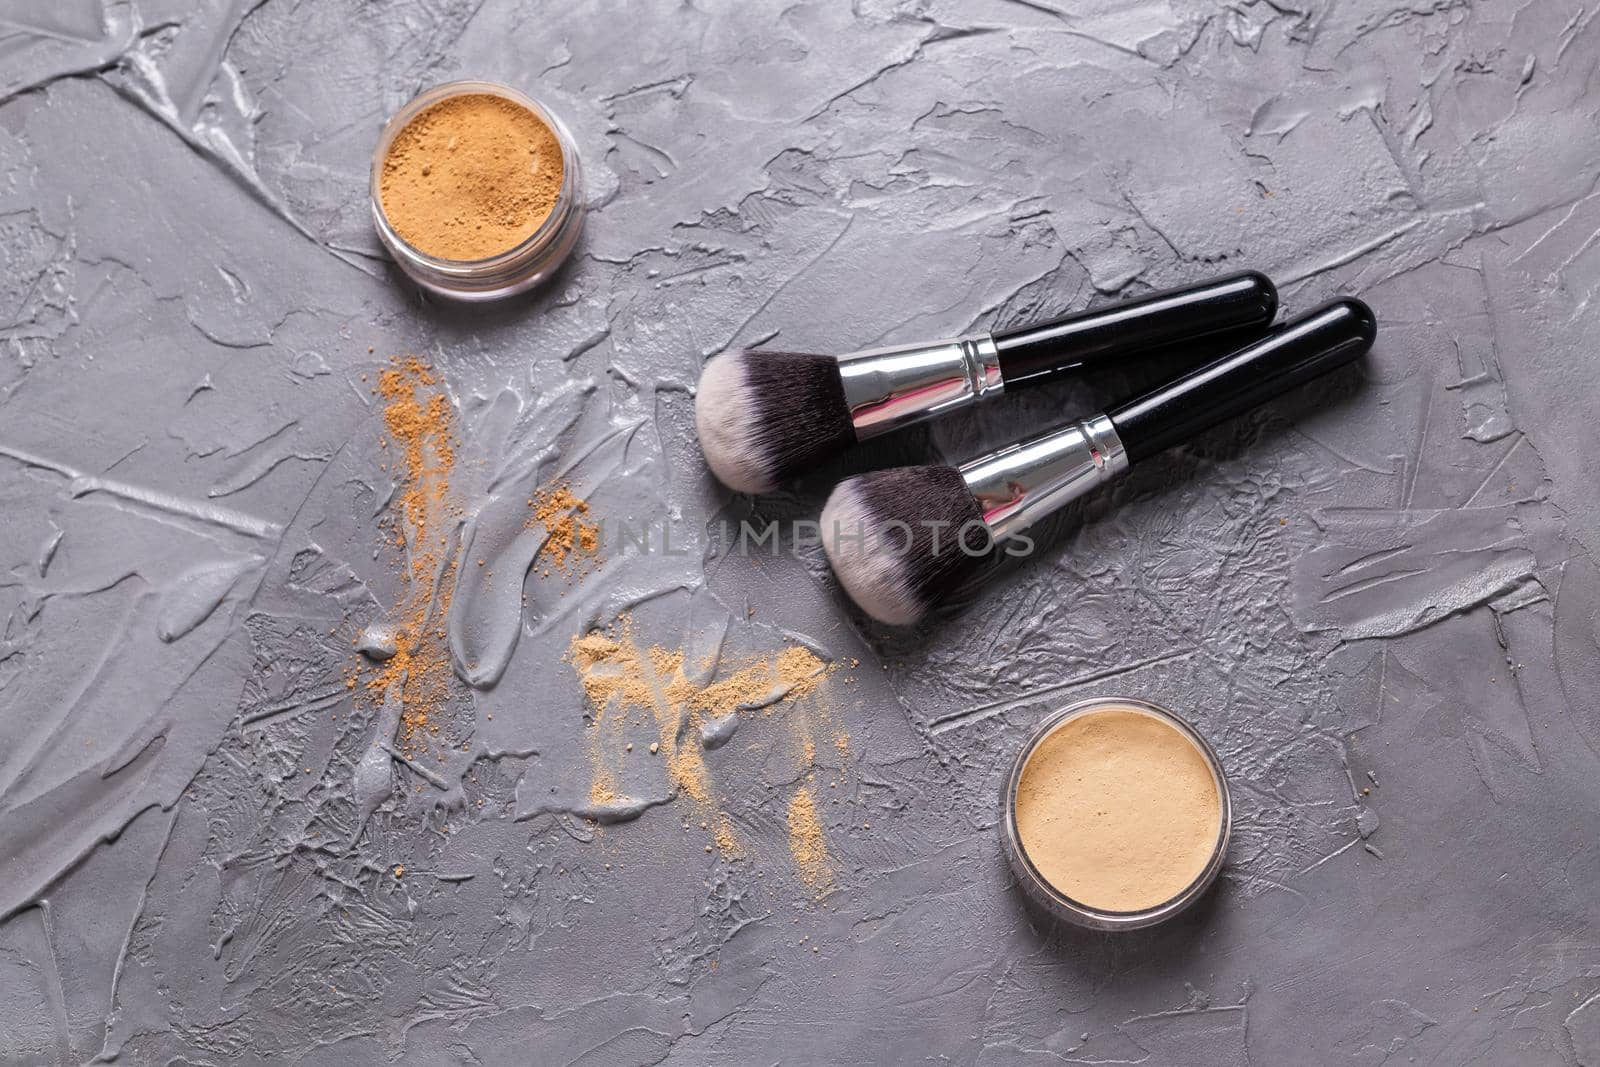 Mineral powder of different colors with a brushes for make-up on wooden background, top view by Satura86